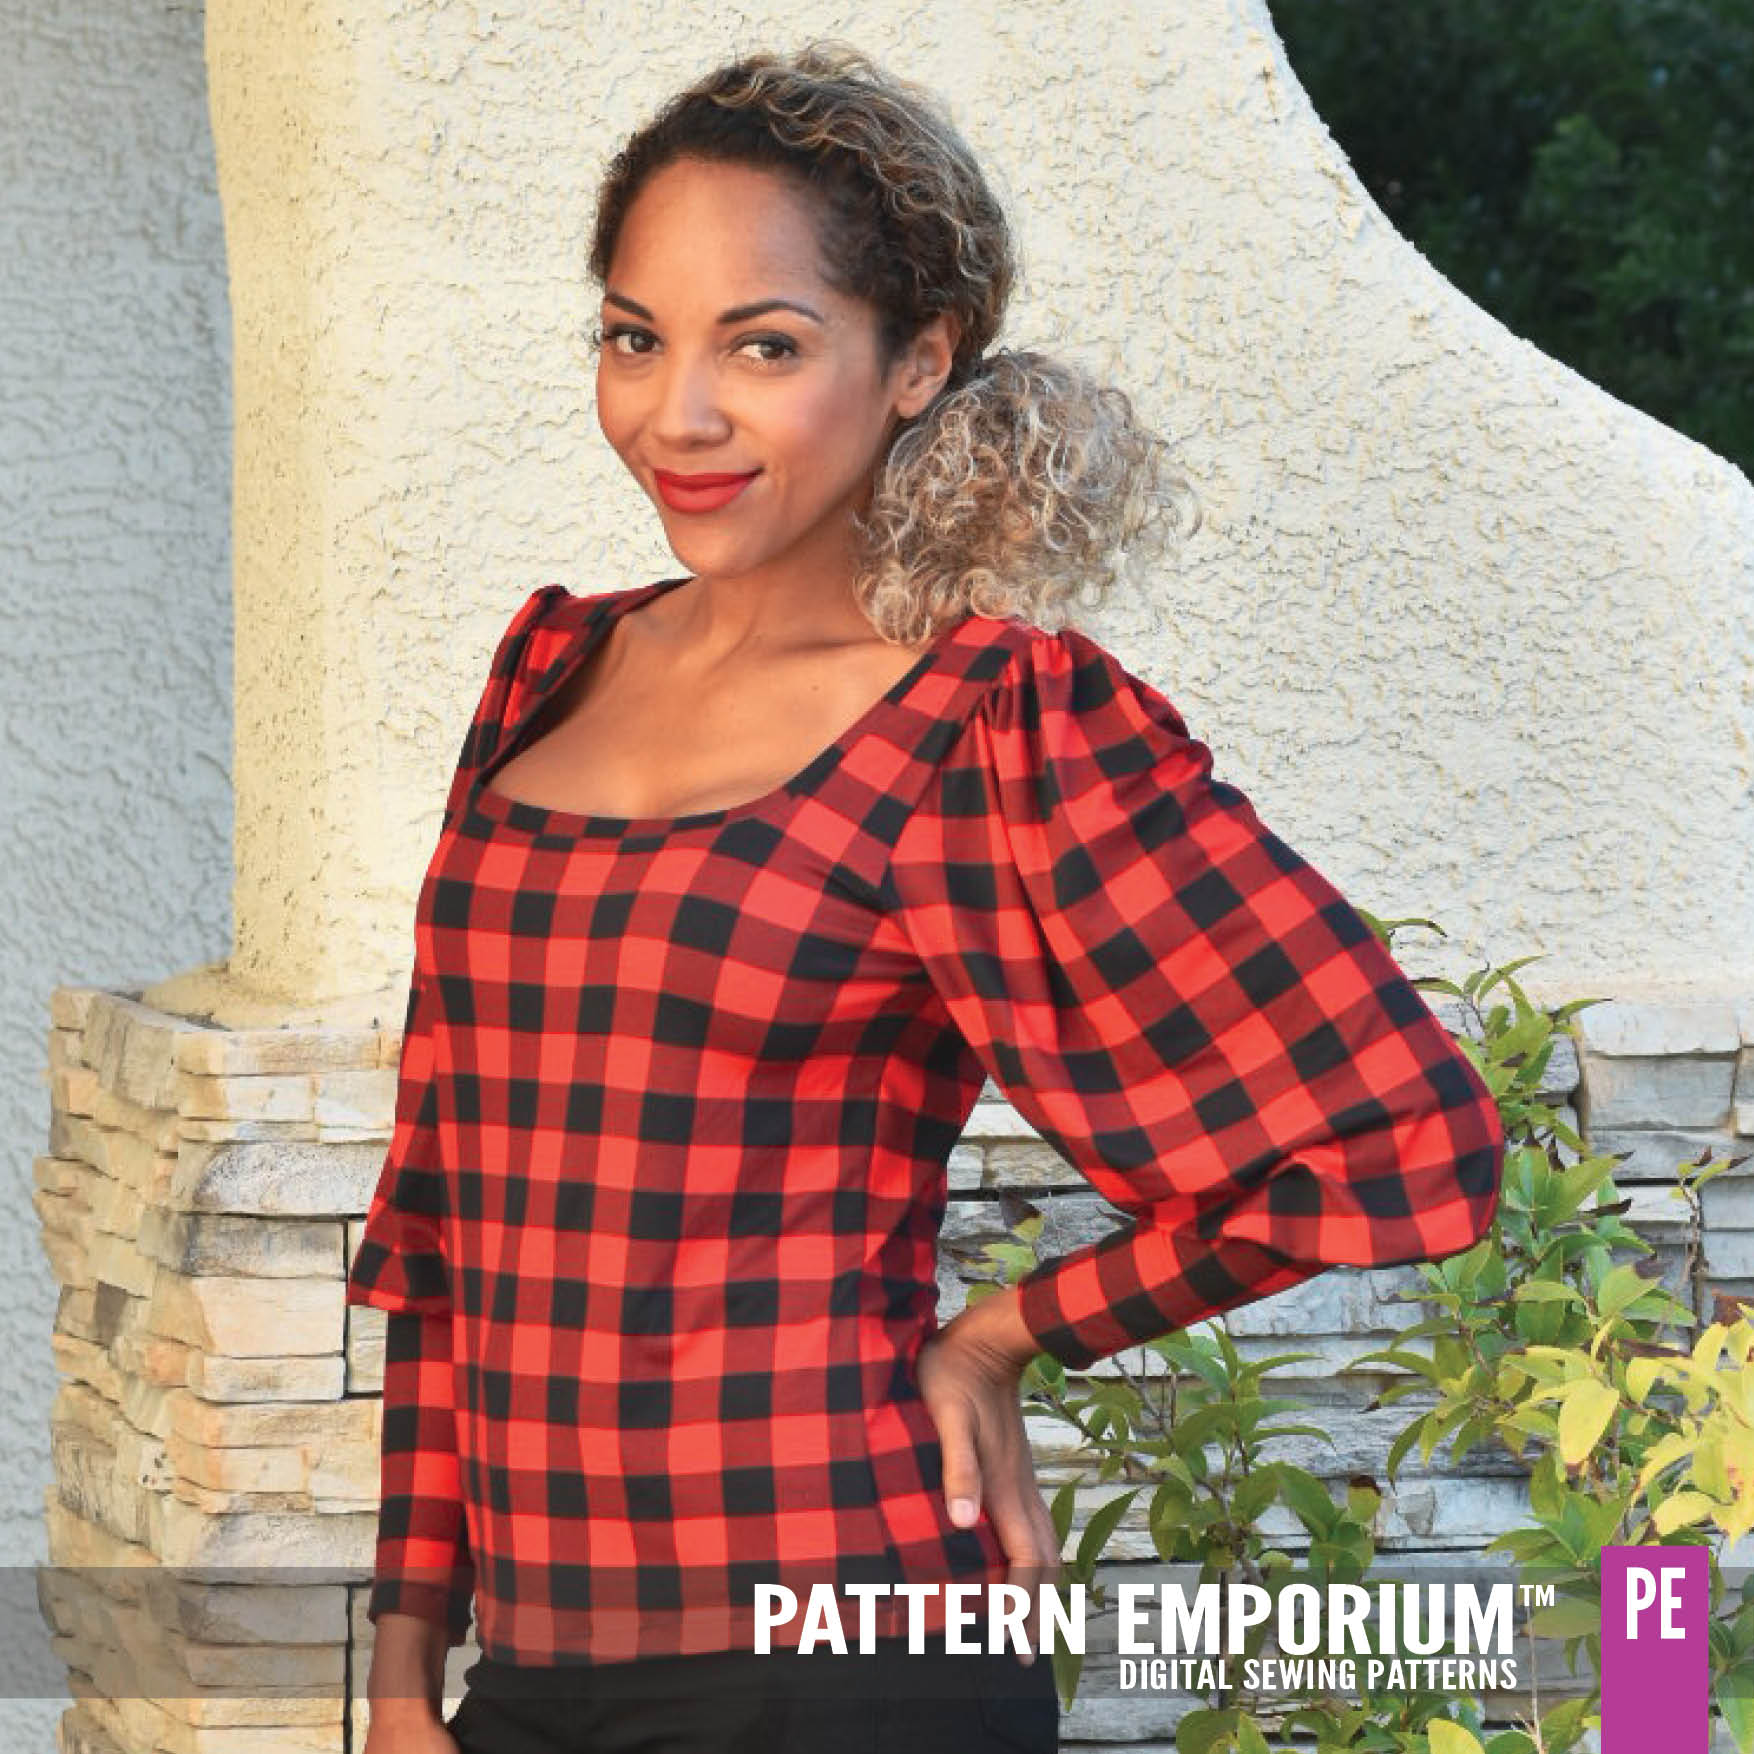 Shop Top Sewing Patterns Online